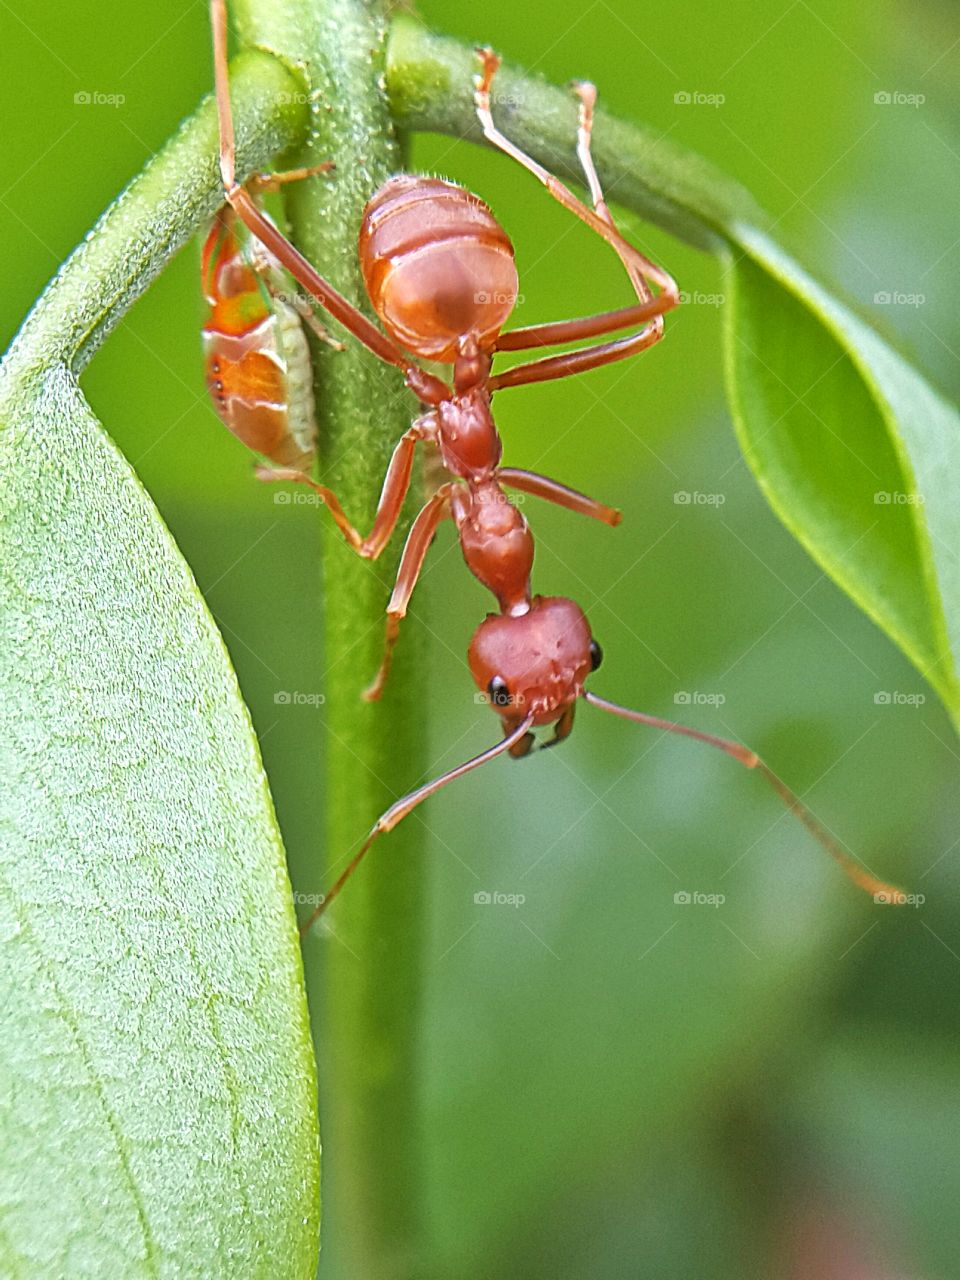 Ants and aphids on a green leaf